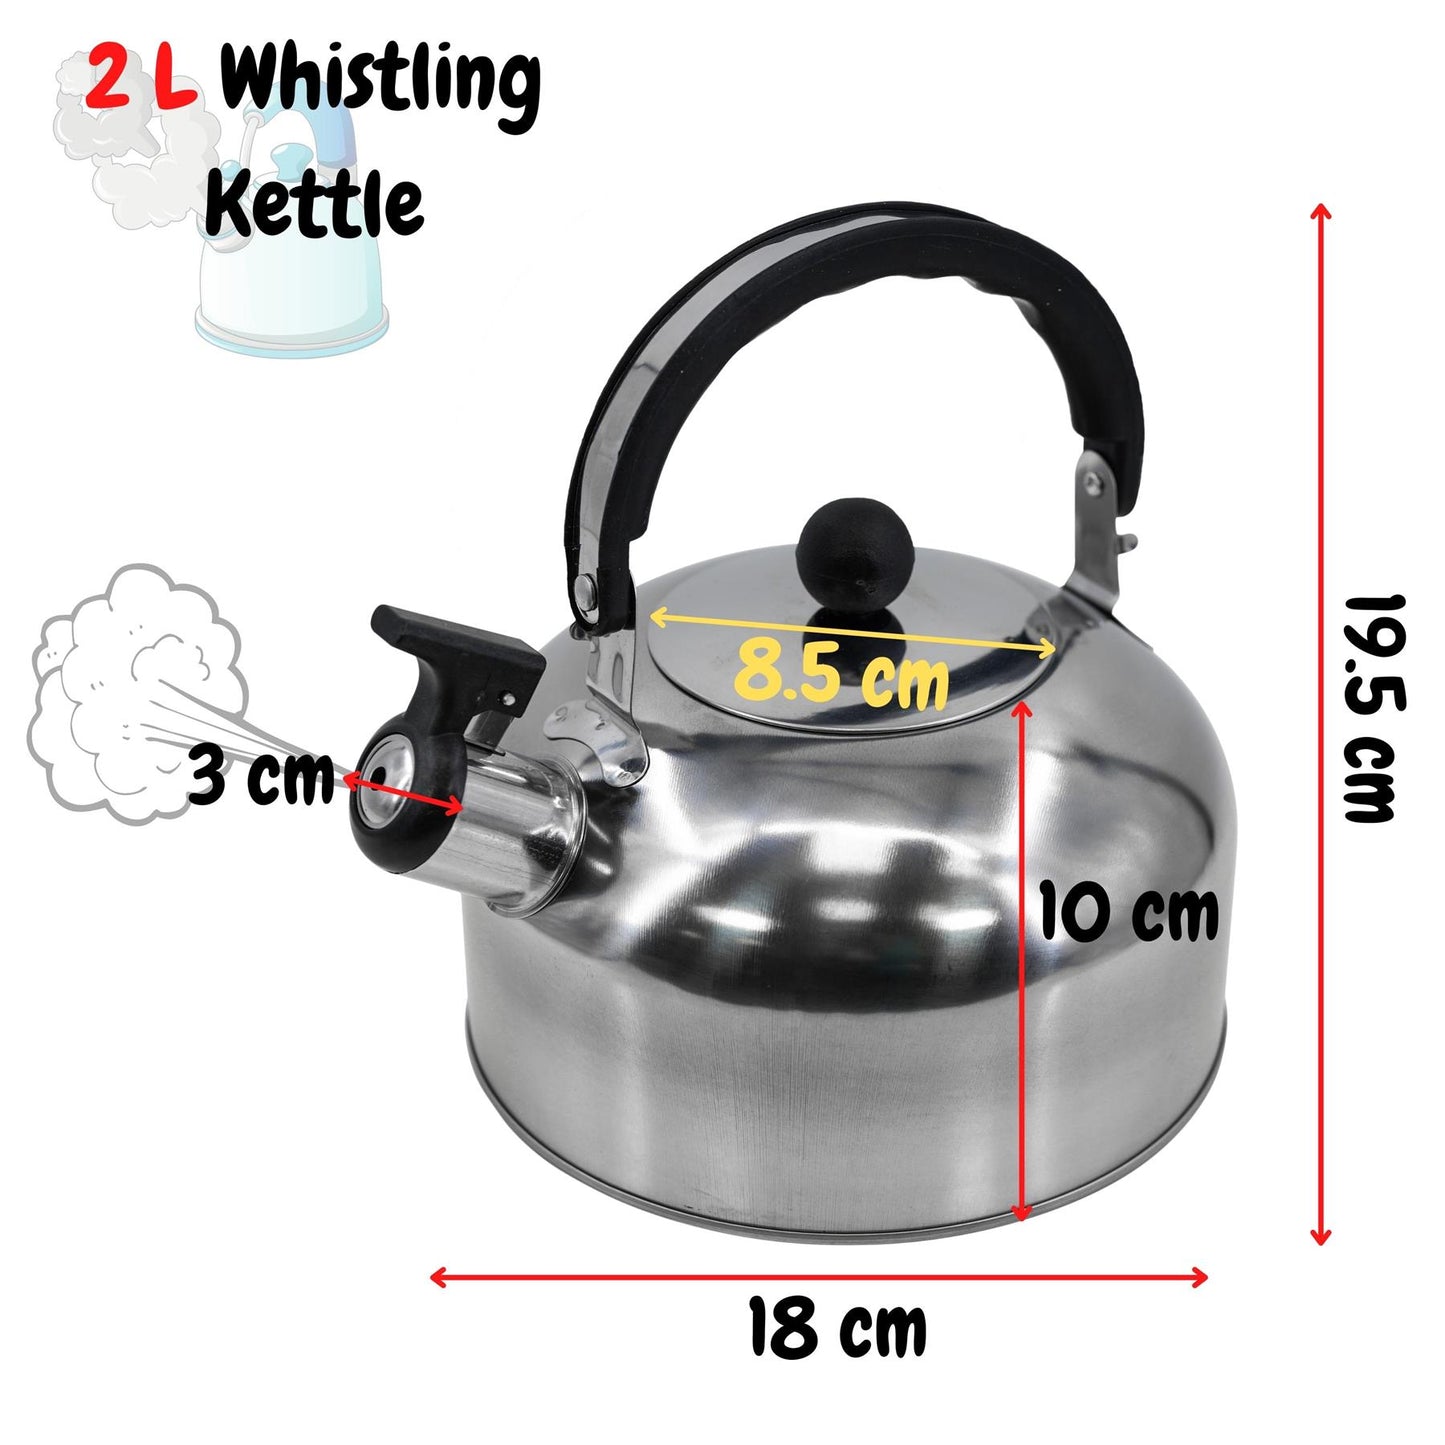 2 L Stainless Steel Whistling Camping Kettle by GEEZY - UKBuyZone